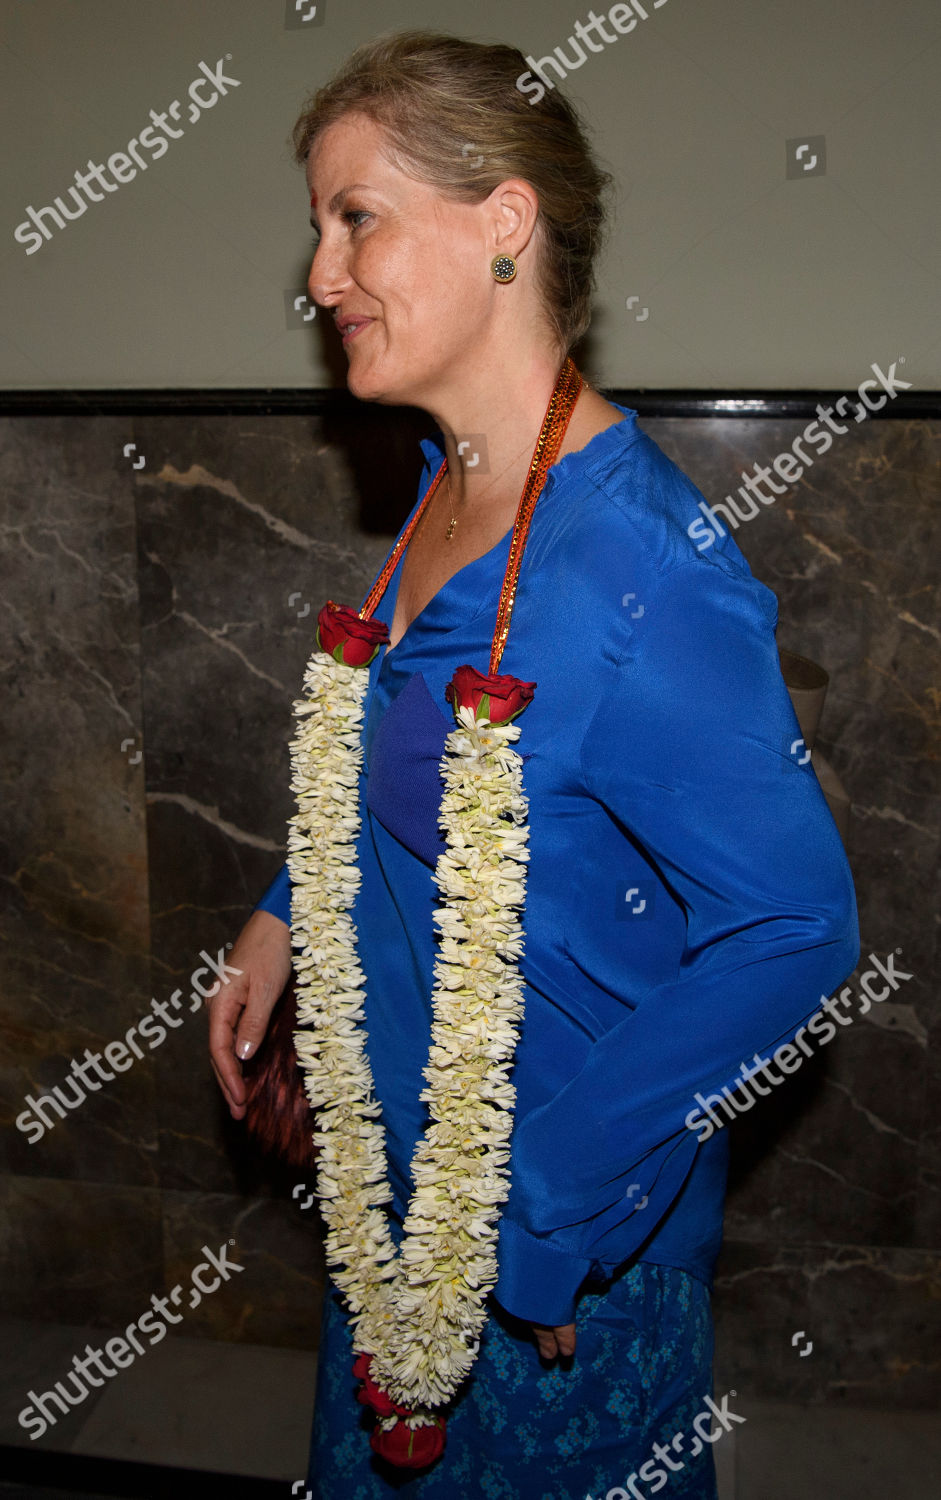 sophie-countess-of-wessex-visit-to-india-shutterstock-editorial-10222586bq.jpg